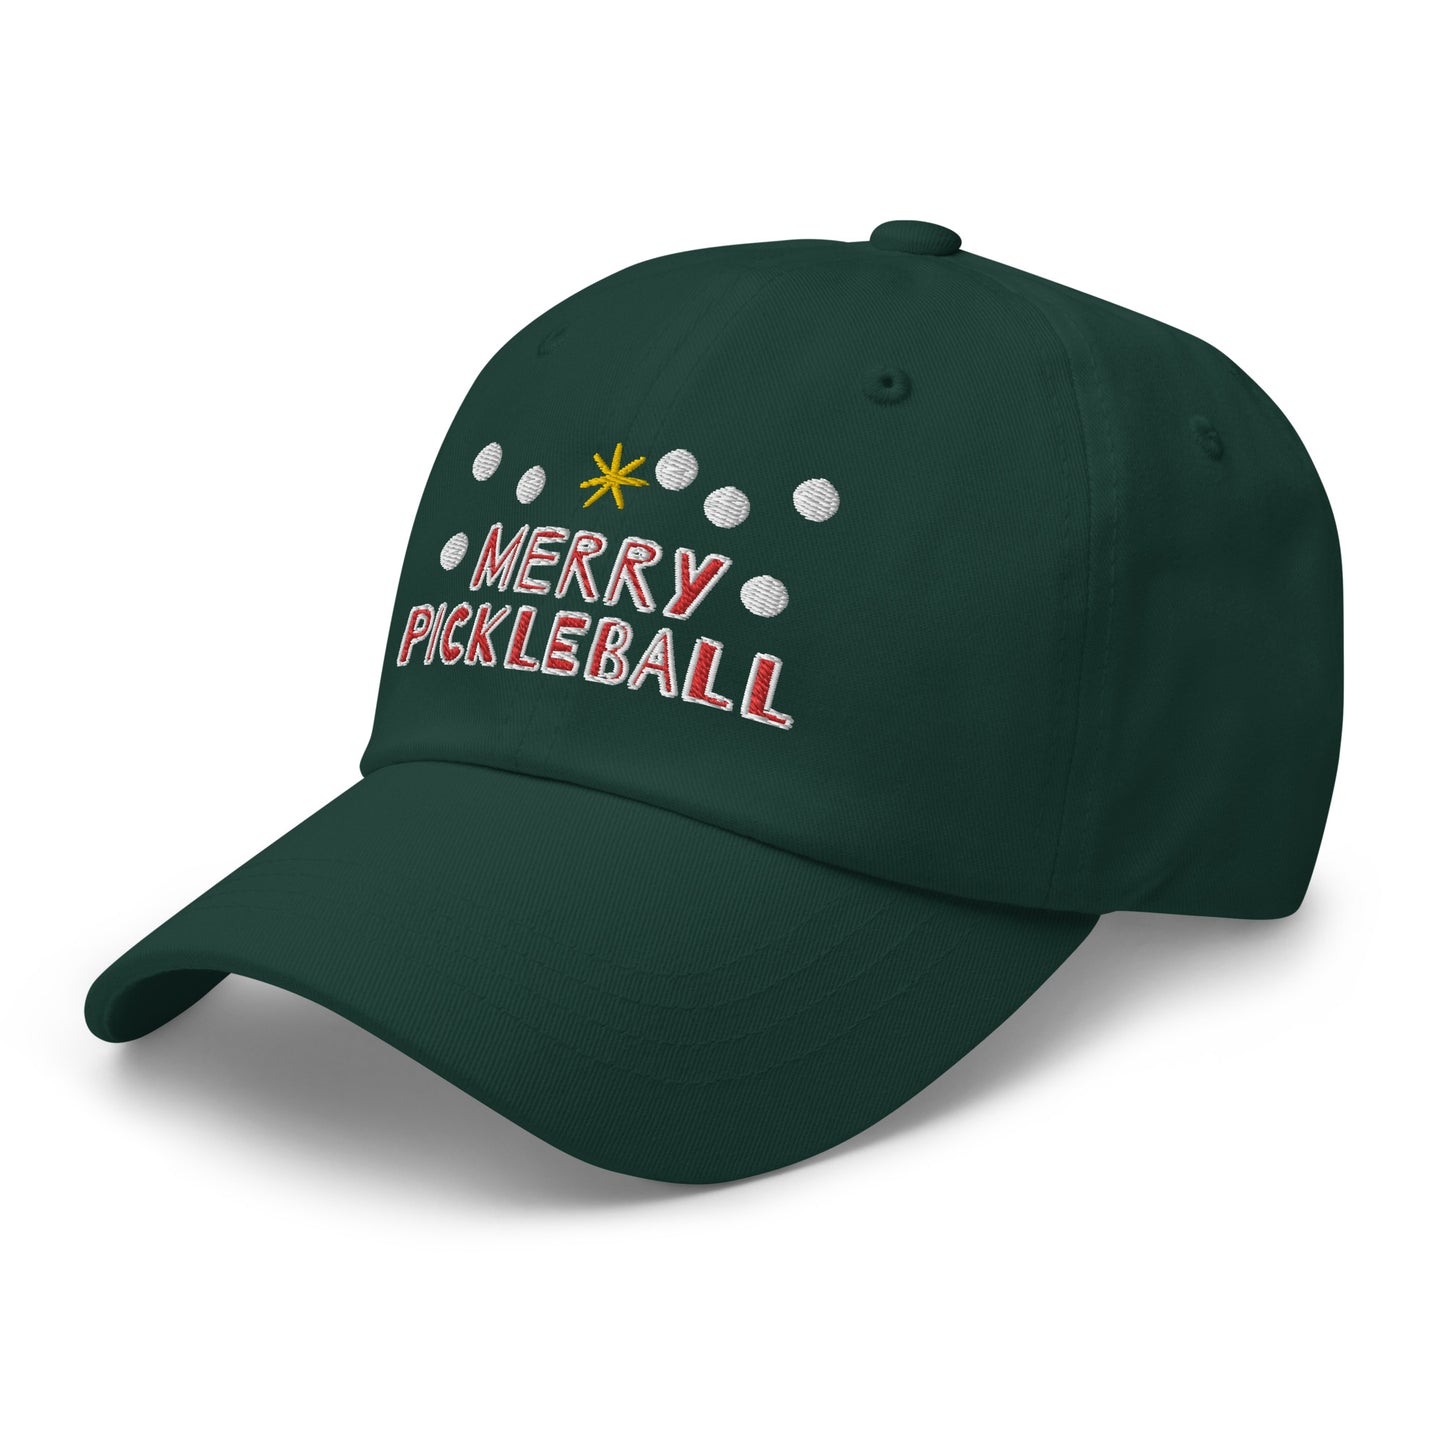 Cotton Twill Classic Cap: Embroidered Hat Merry Pickleball (more colors)